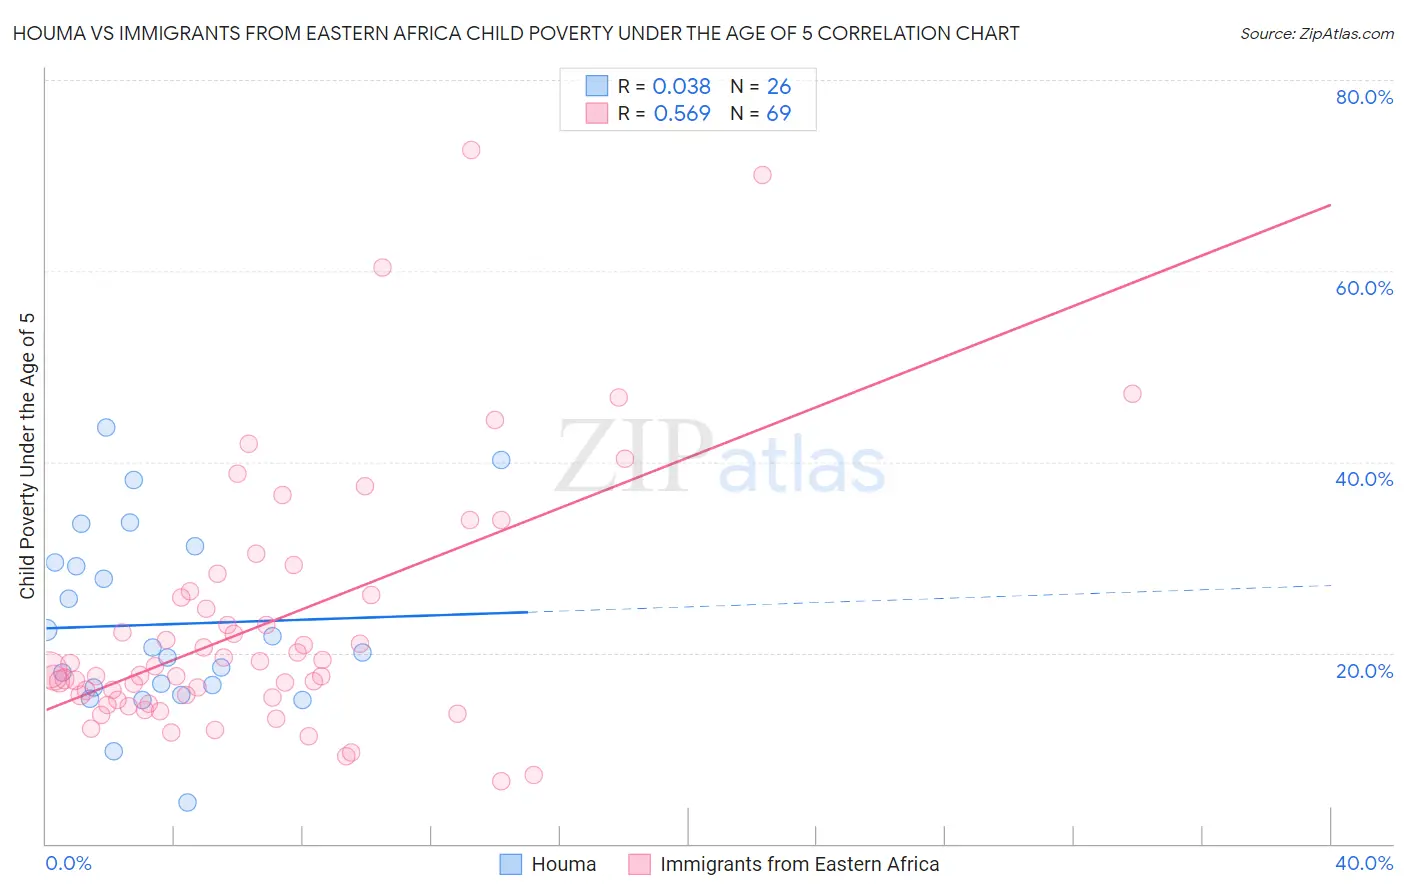 Houma vs Immigrants from Eastern Africa Child Poverty Under the Age of 5